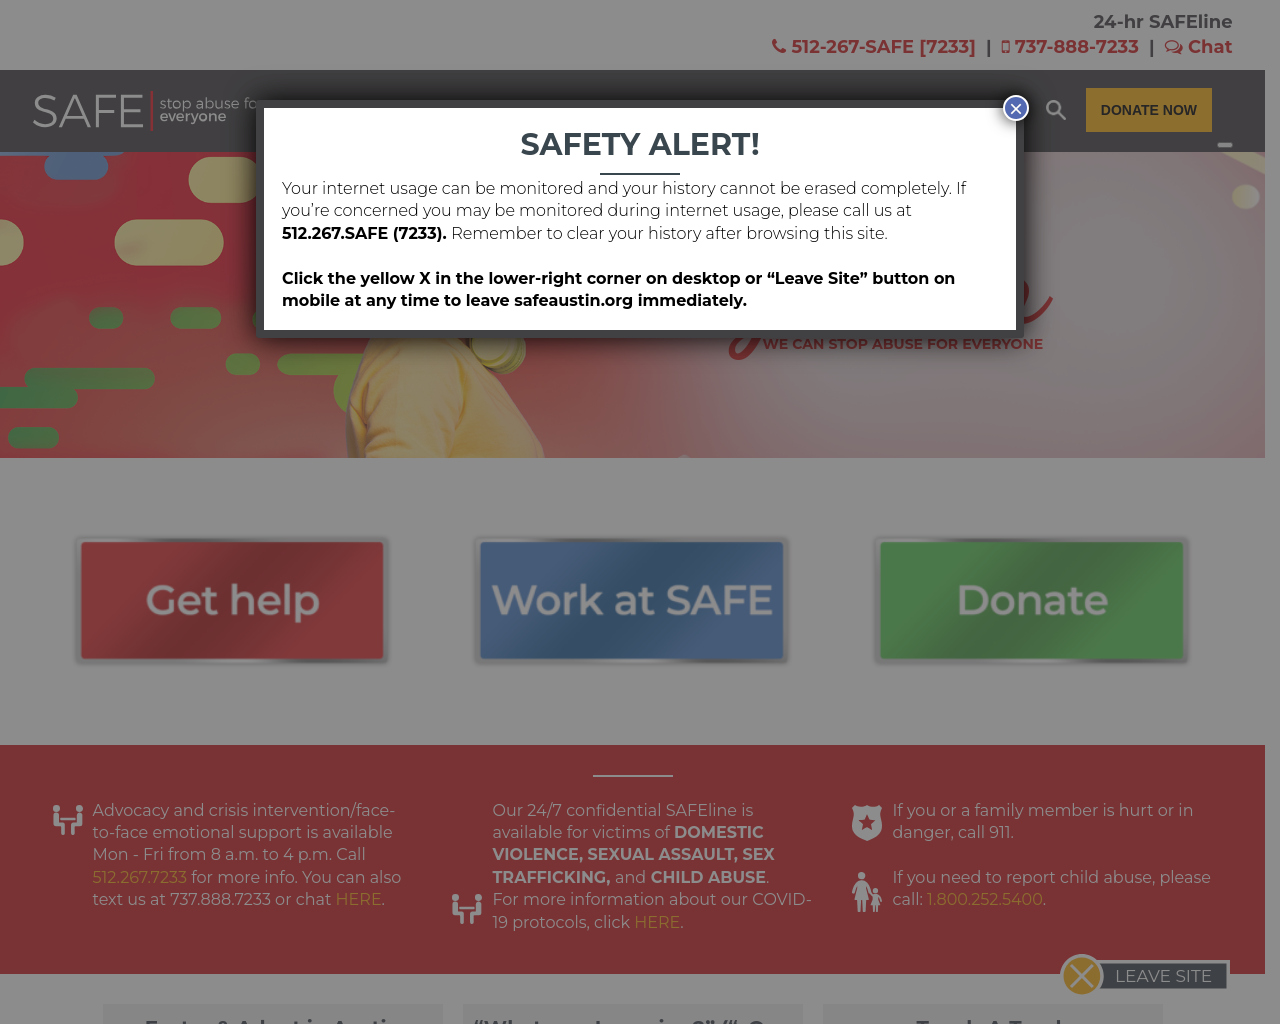 safeplace.org